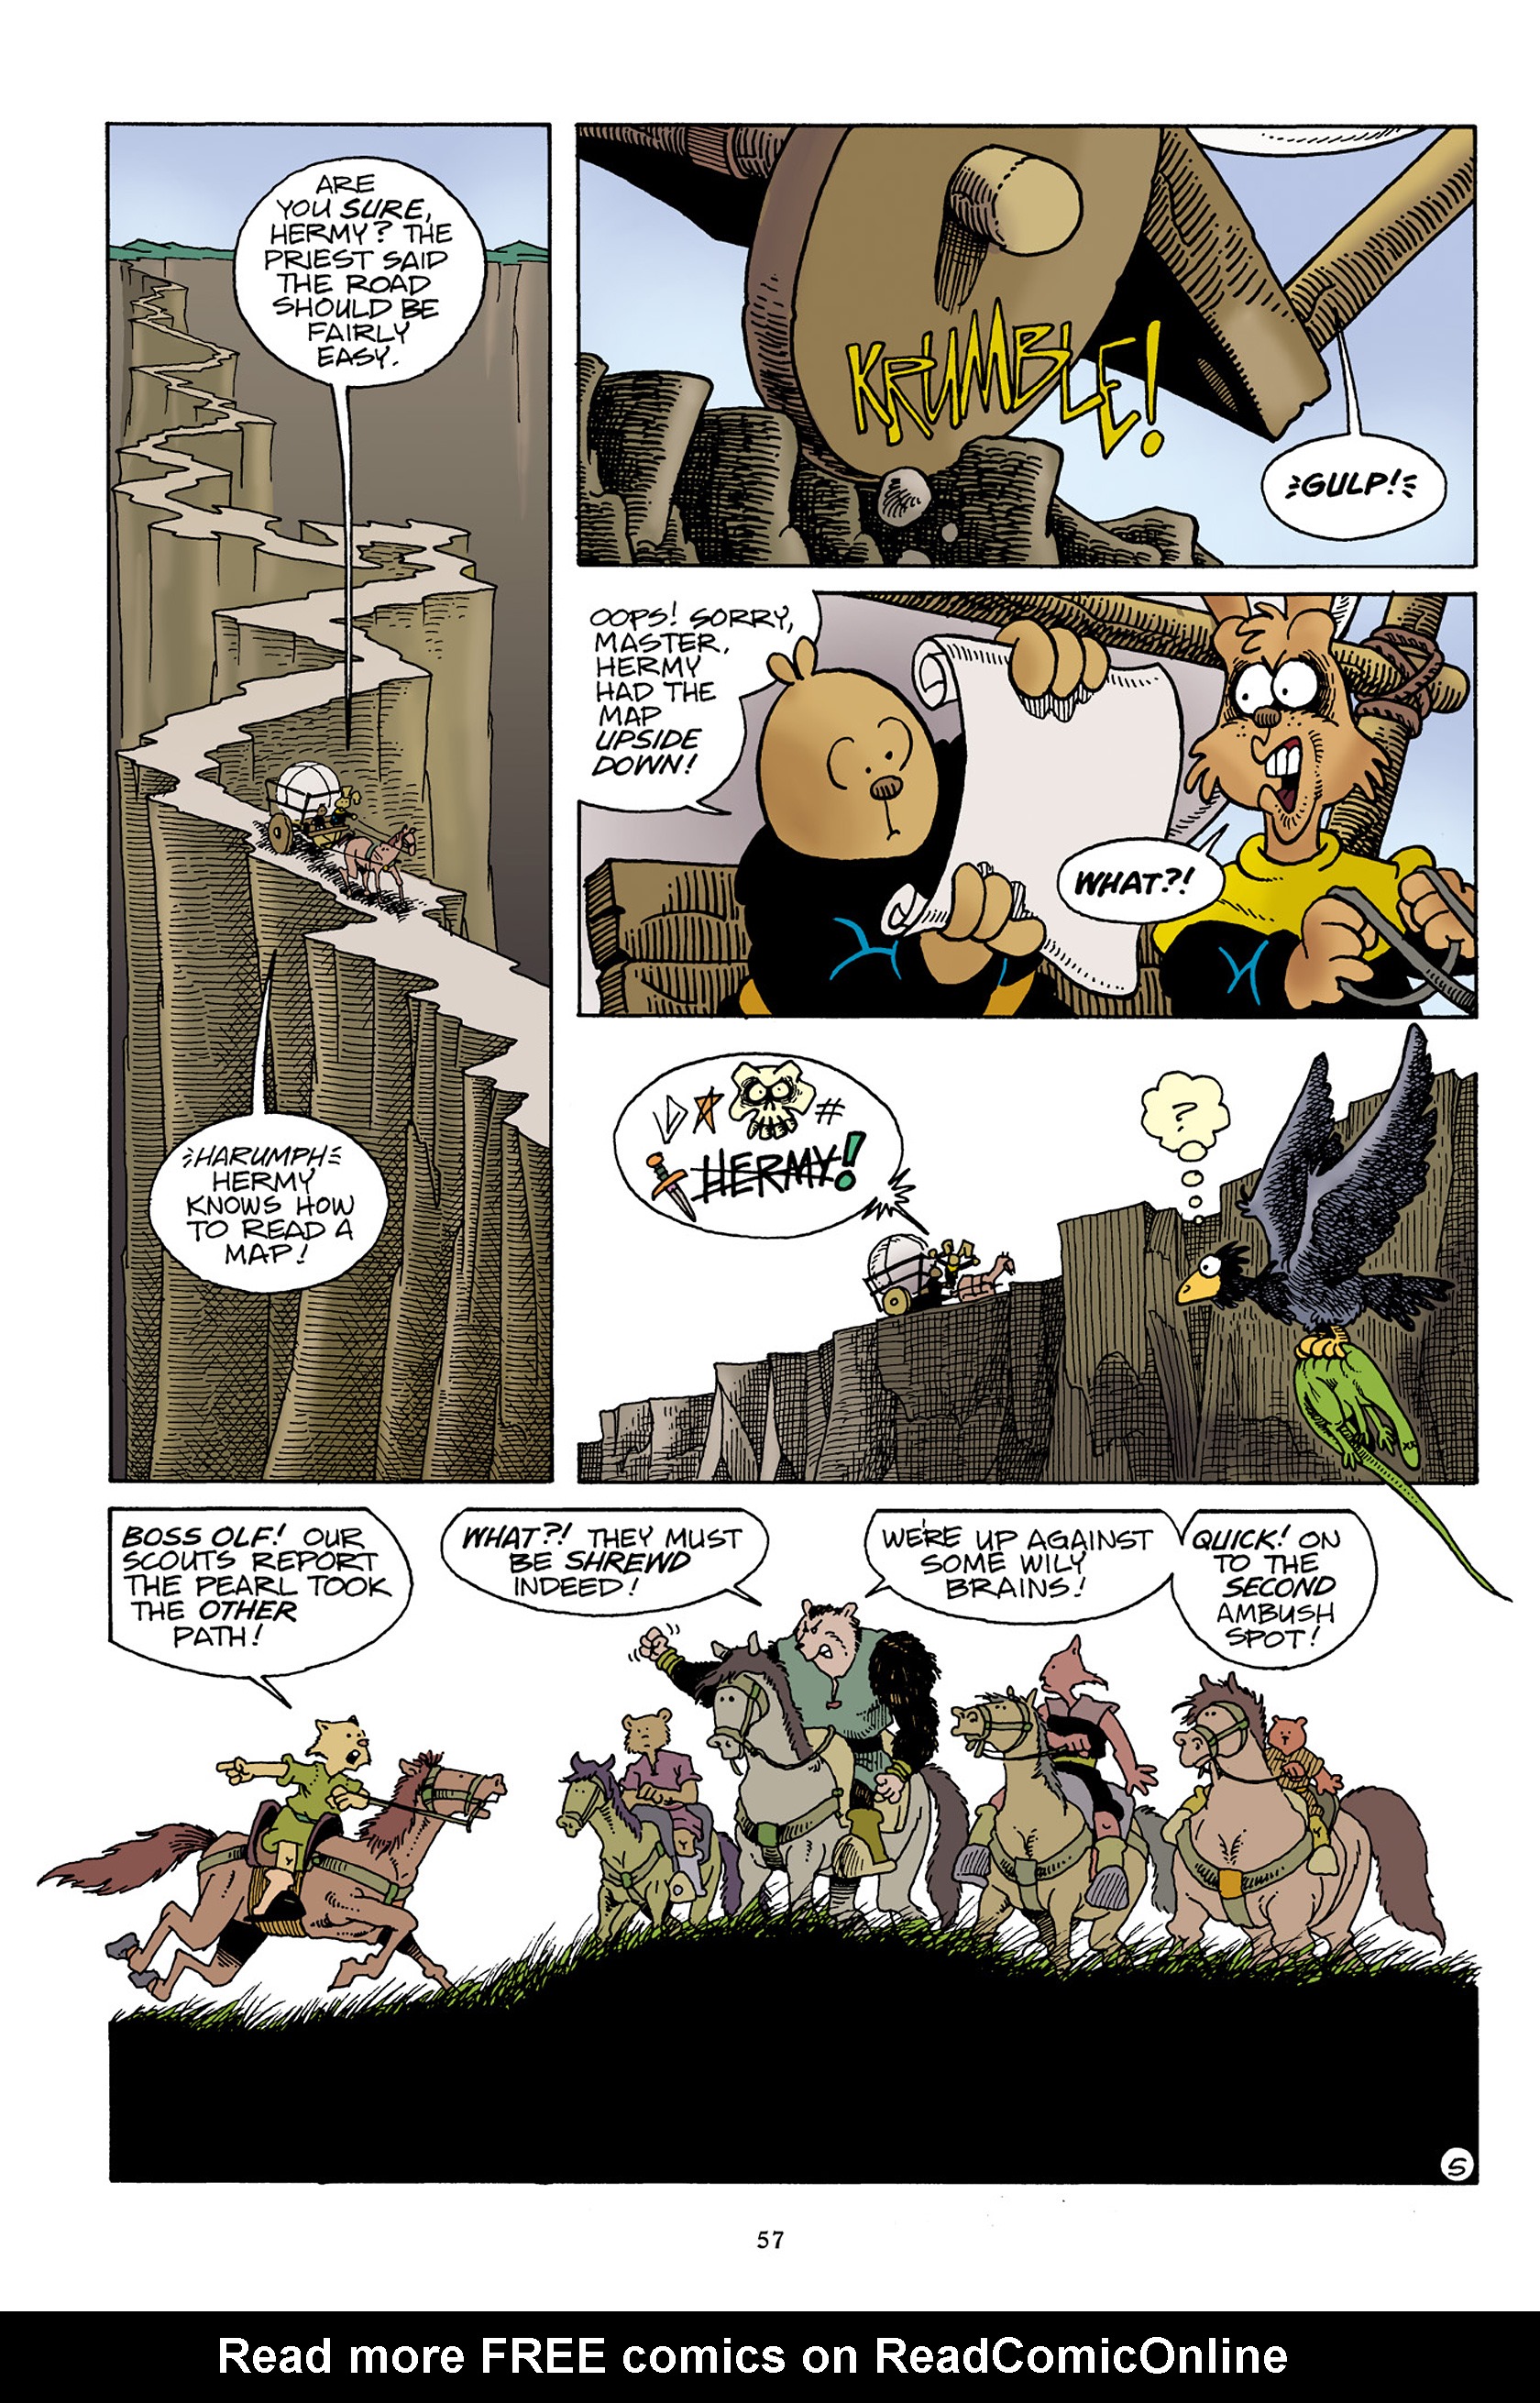 The Adventures of Nilson Groundthumper and Hermy TPB #1 - English 57